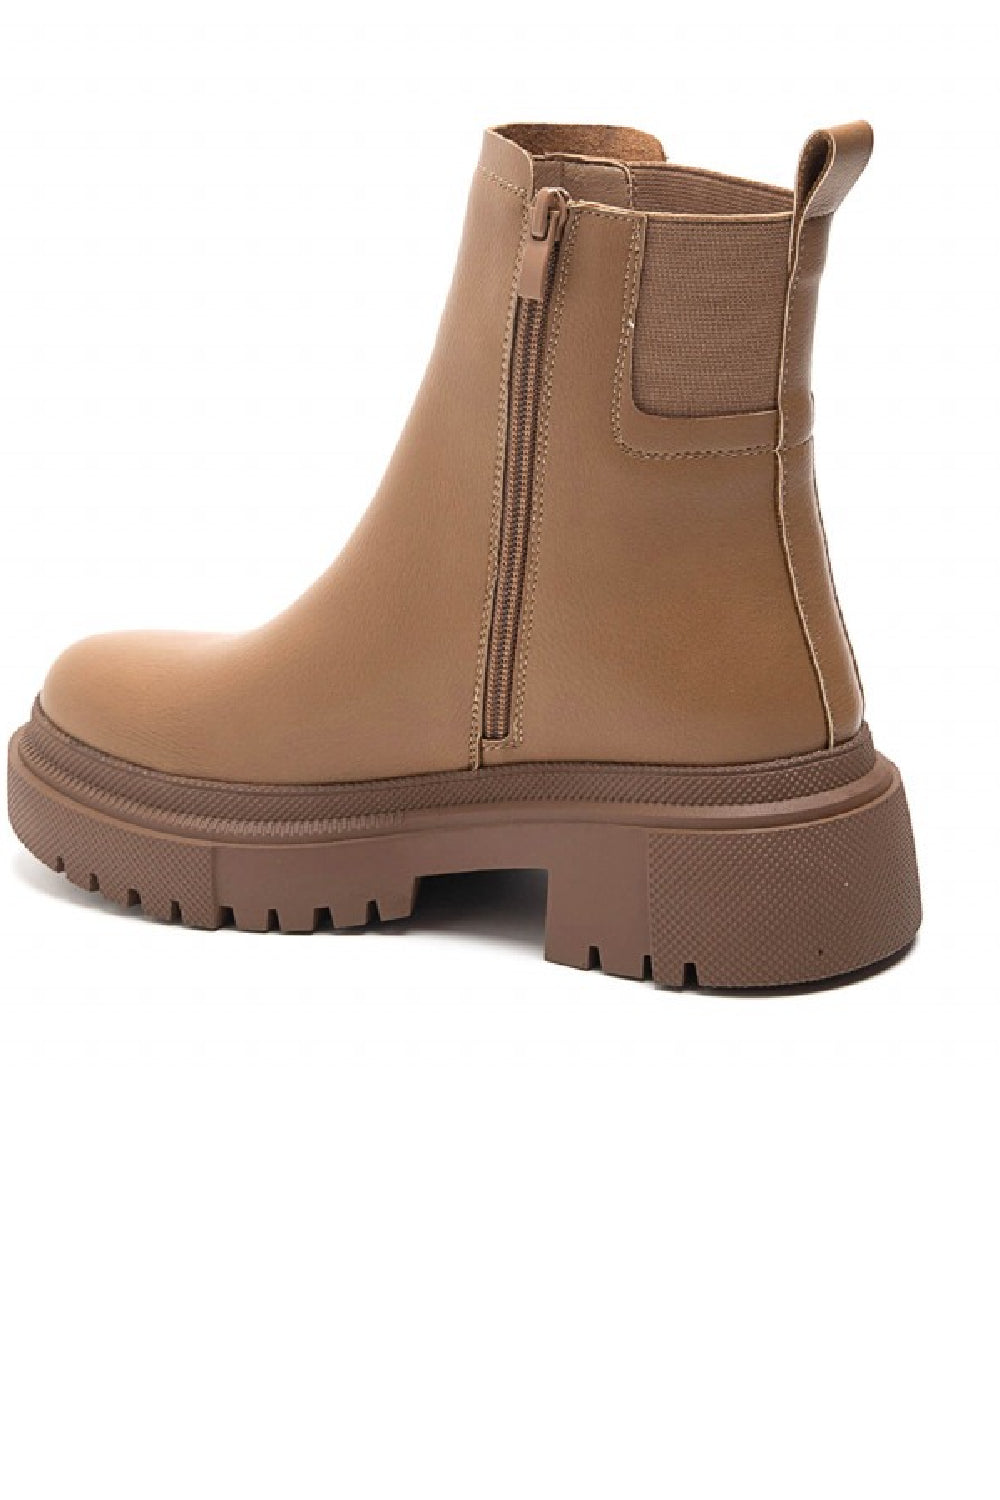 CAMEL PU FLAT ELASTICATED CHUNKY CHELSEA ANKLE BOOTS